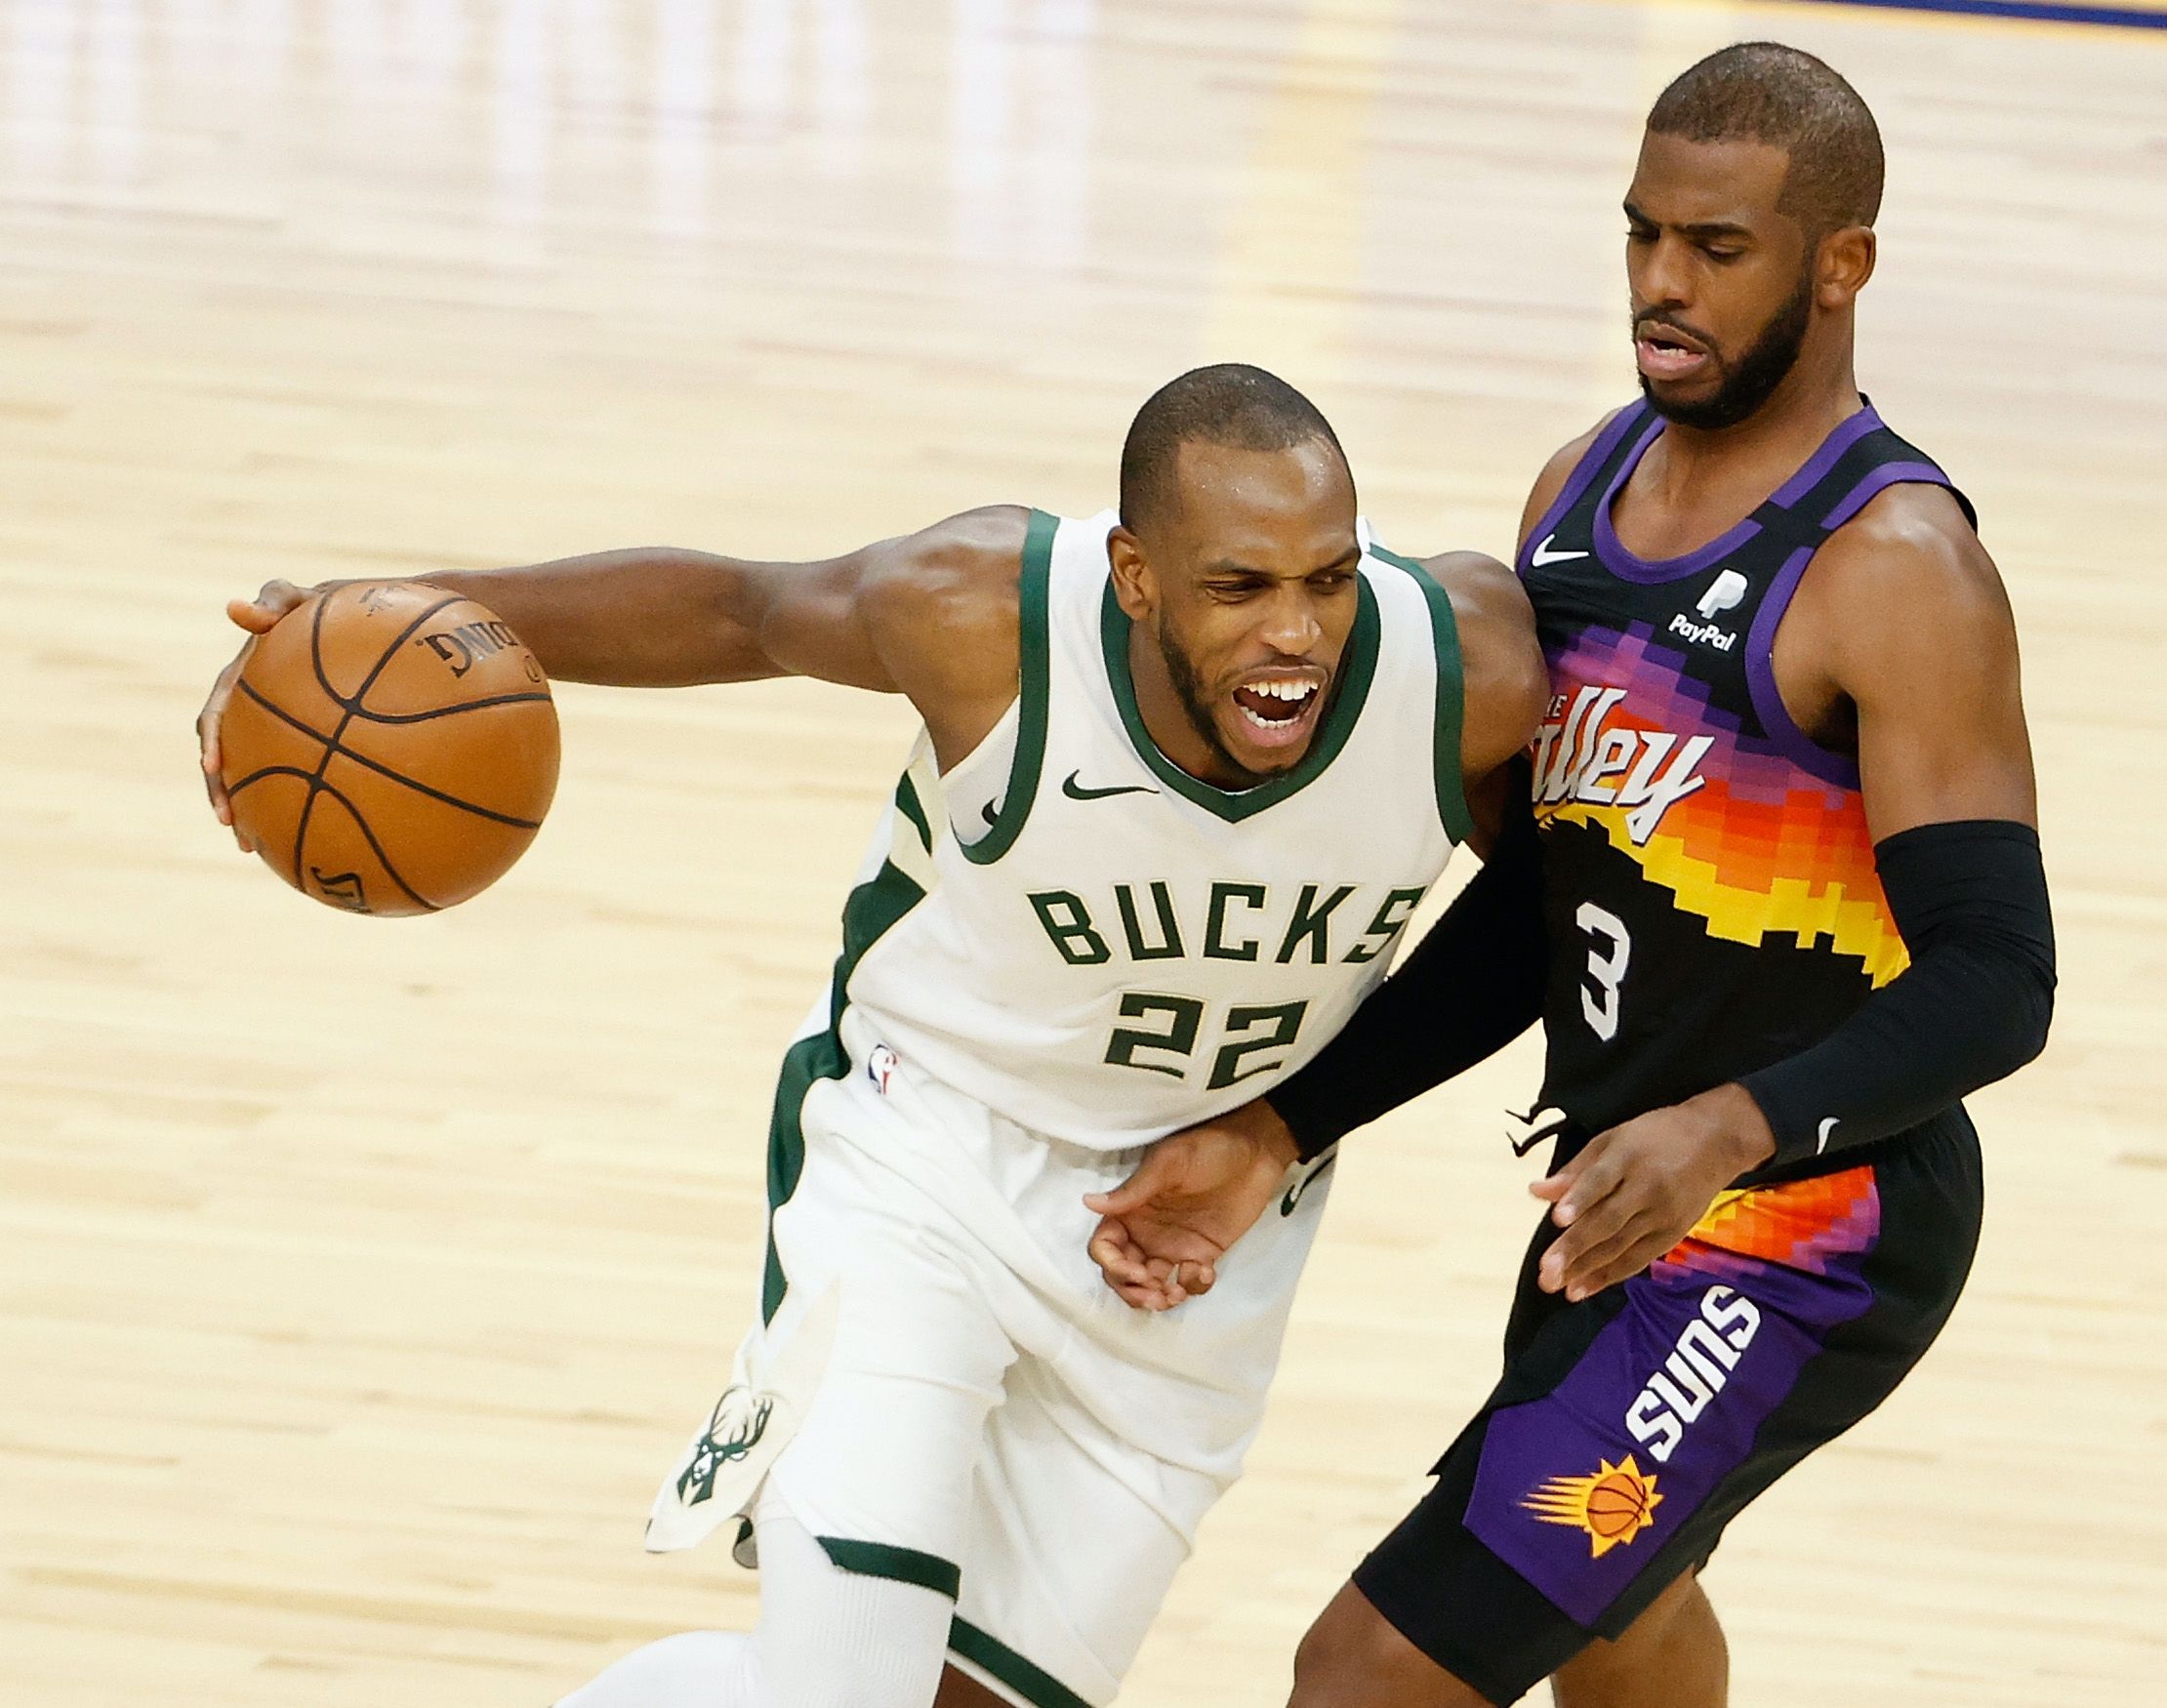 NBA Finals 2021: How to buy tickets to see Phoenix Suns vs. Milwaukee Bucks in person